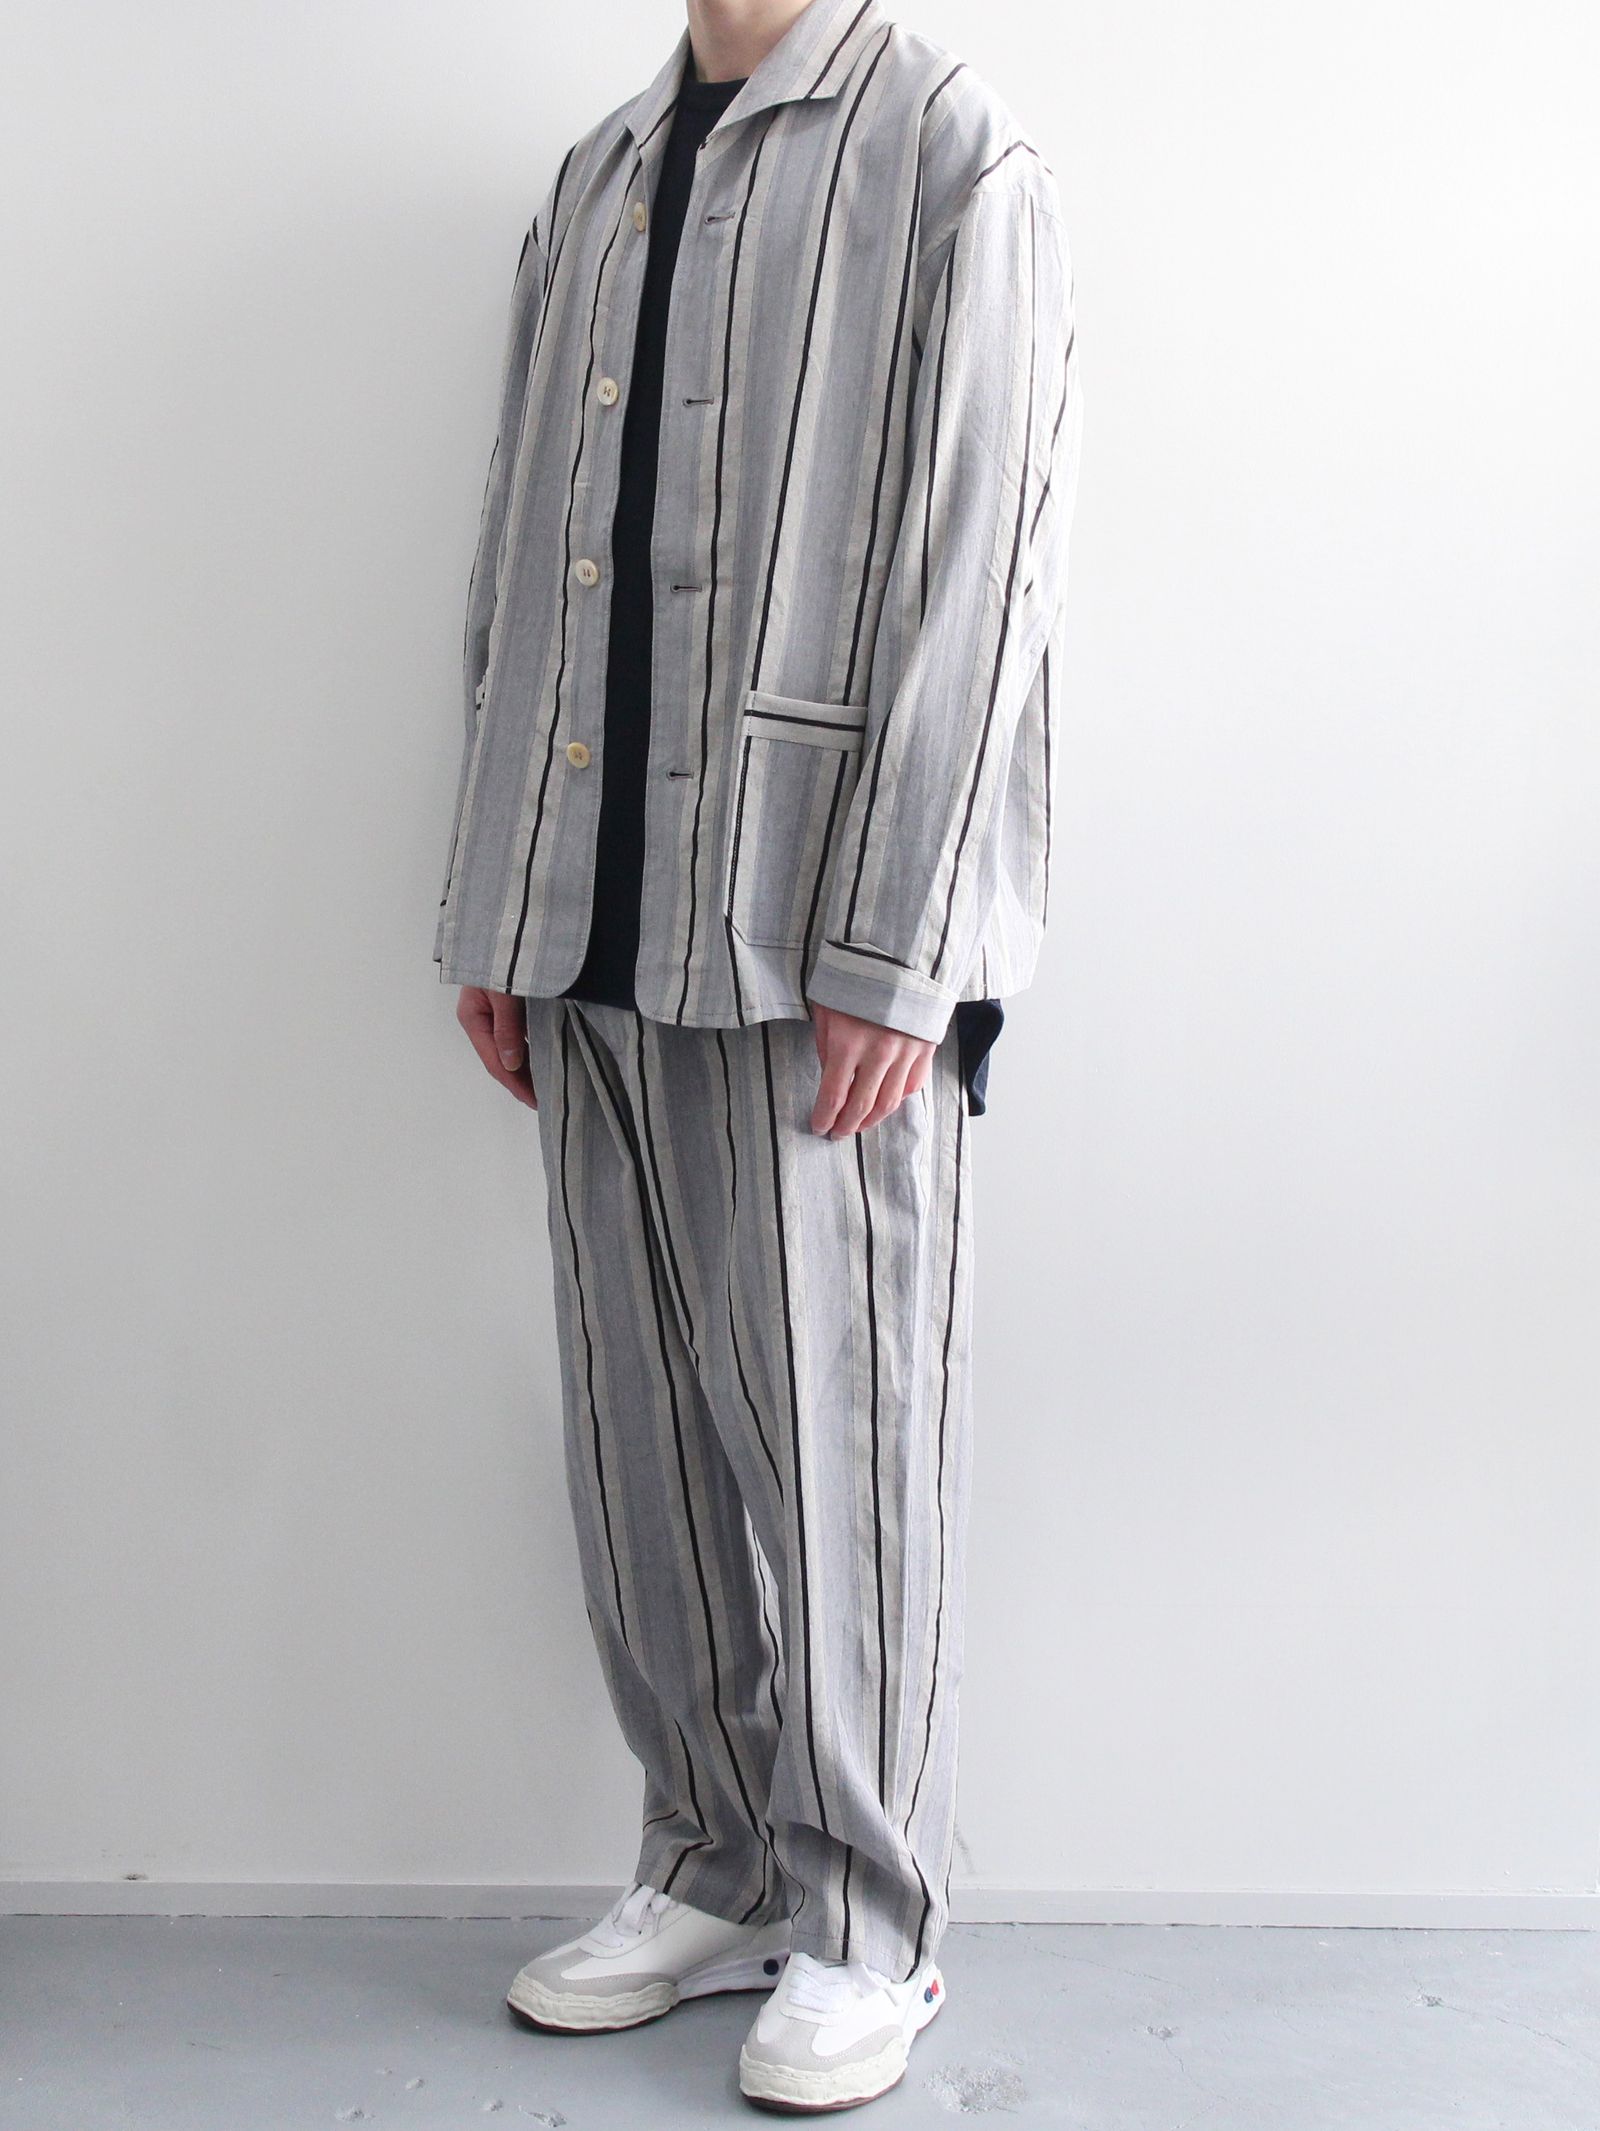 SEVEN BY SEVEN - クックパンツ - COOK PANTS - Cotton stripe